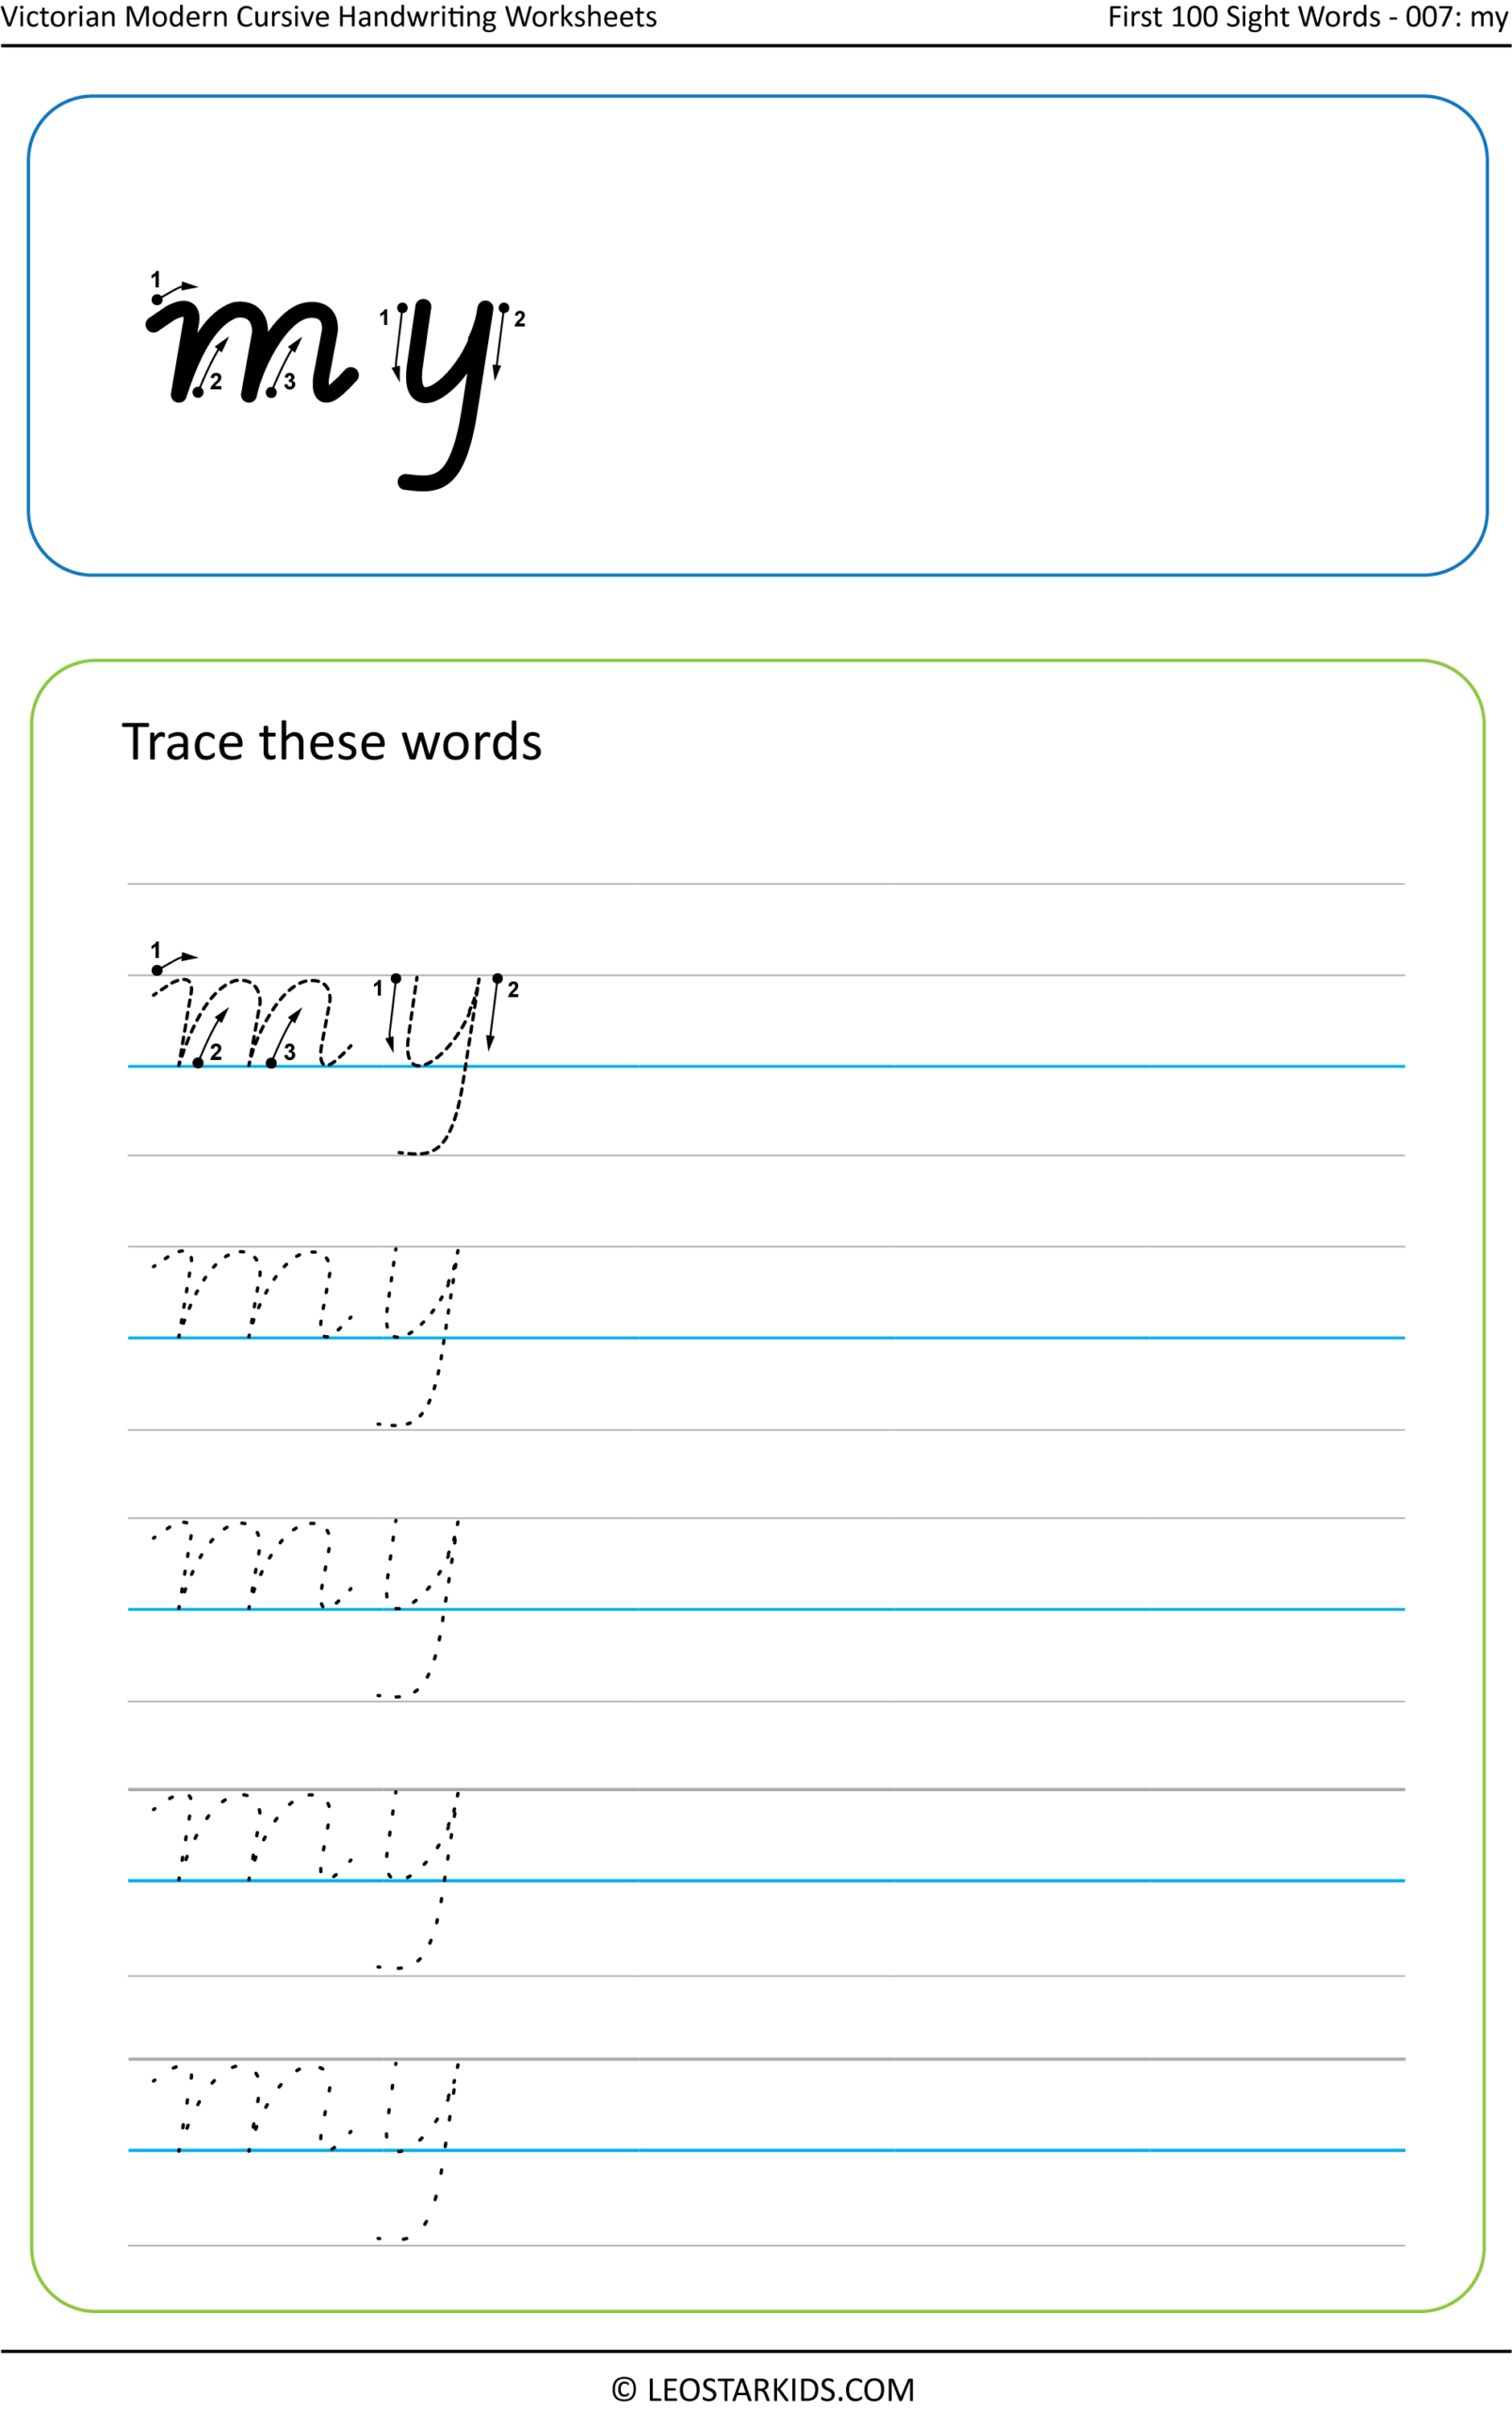 Australian Handwriting Worksheets – Victorian Modern Cursive with Victoria Name Tracing